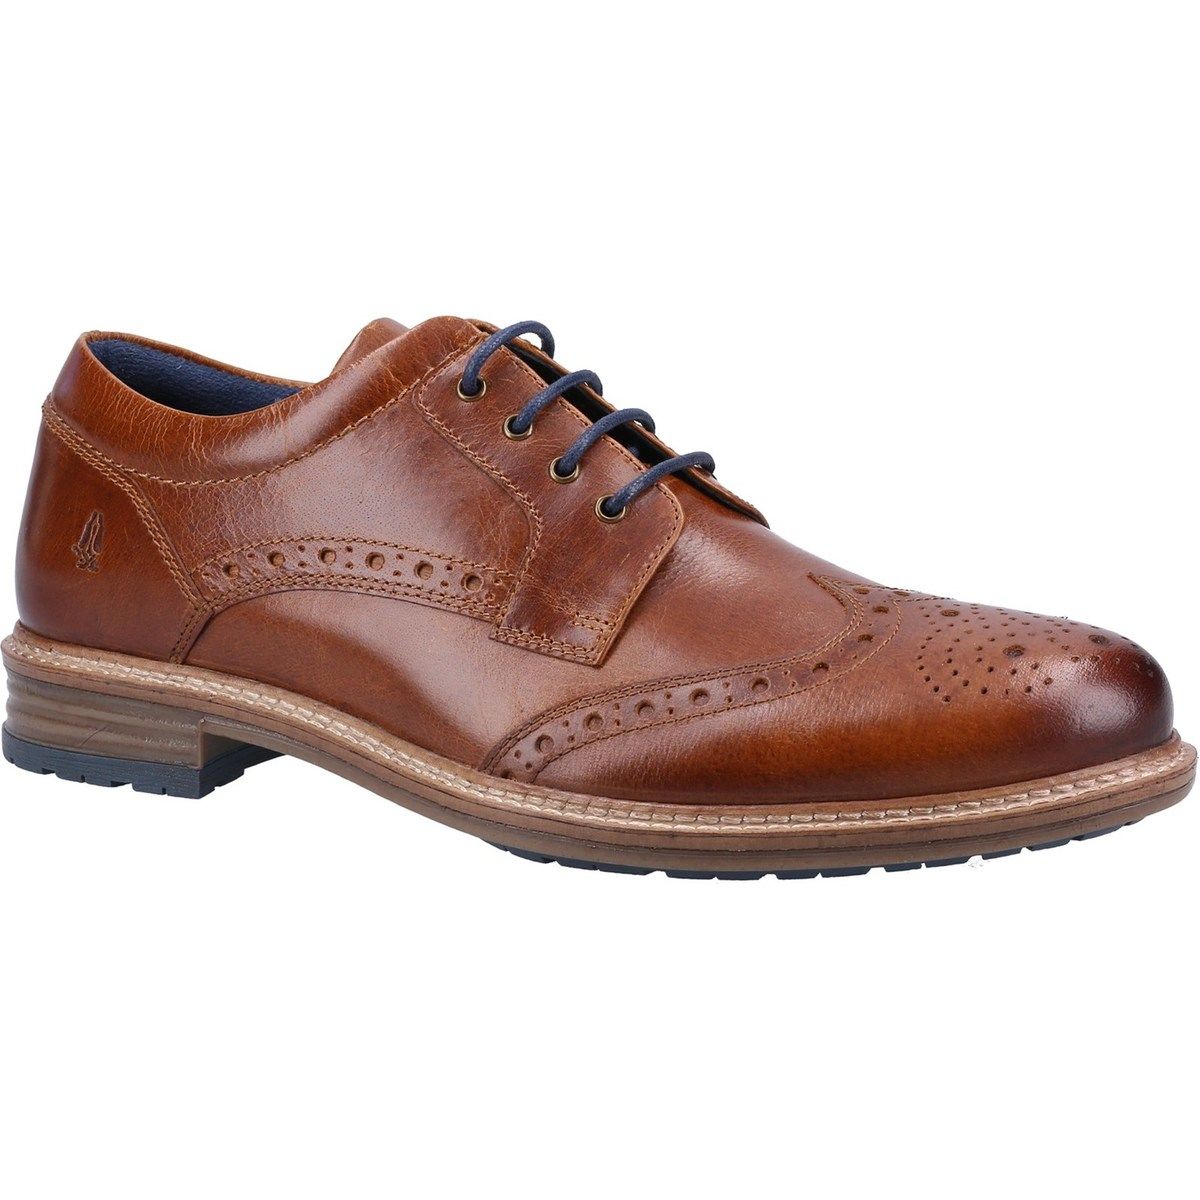 Hush Puppies - Jayden Brogue (Tan Leather) 36710-68545 In Size 9 In Plain Tan Leather